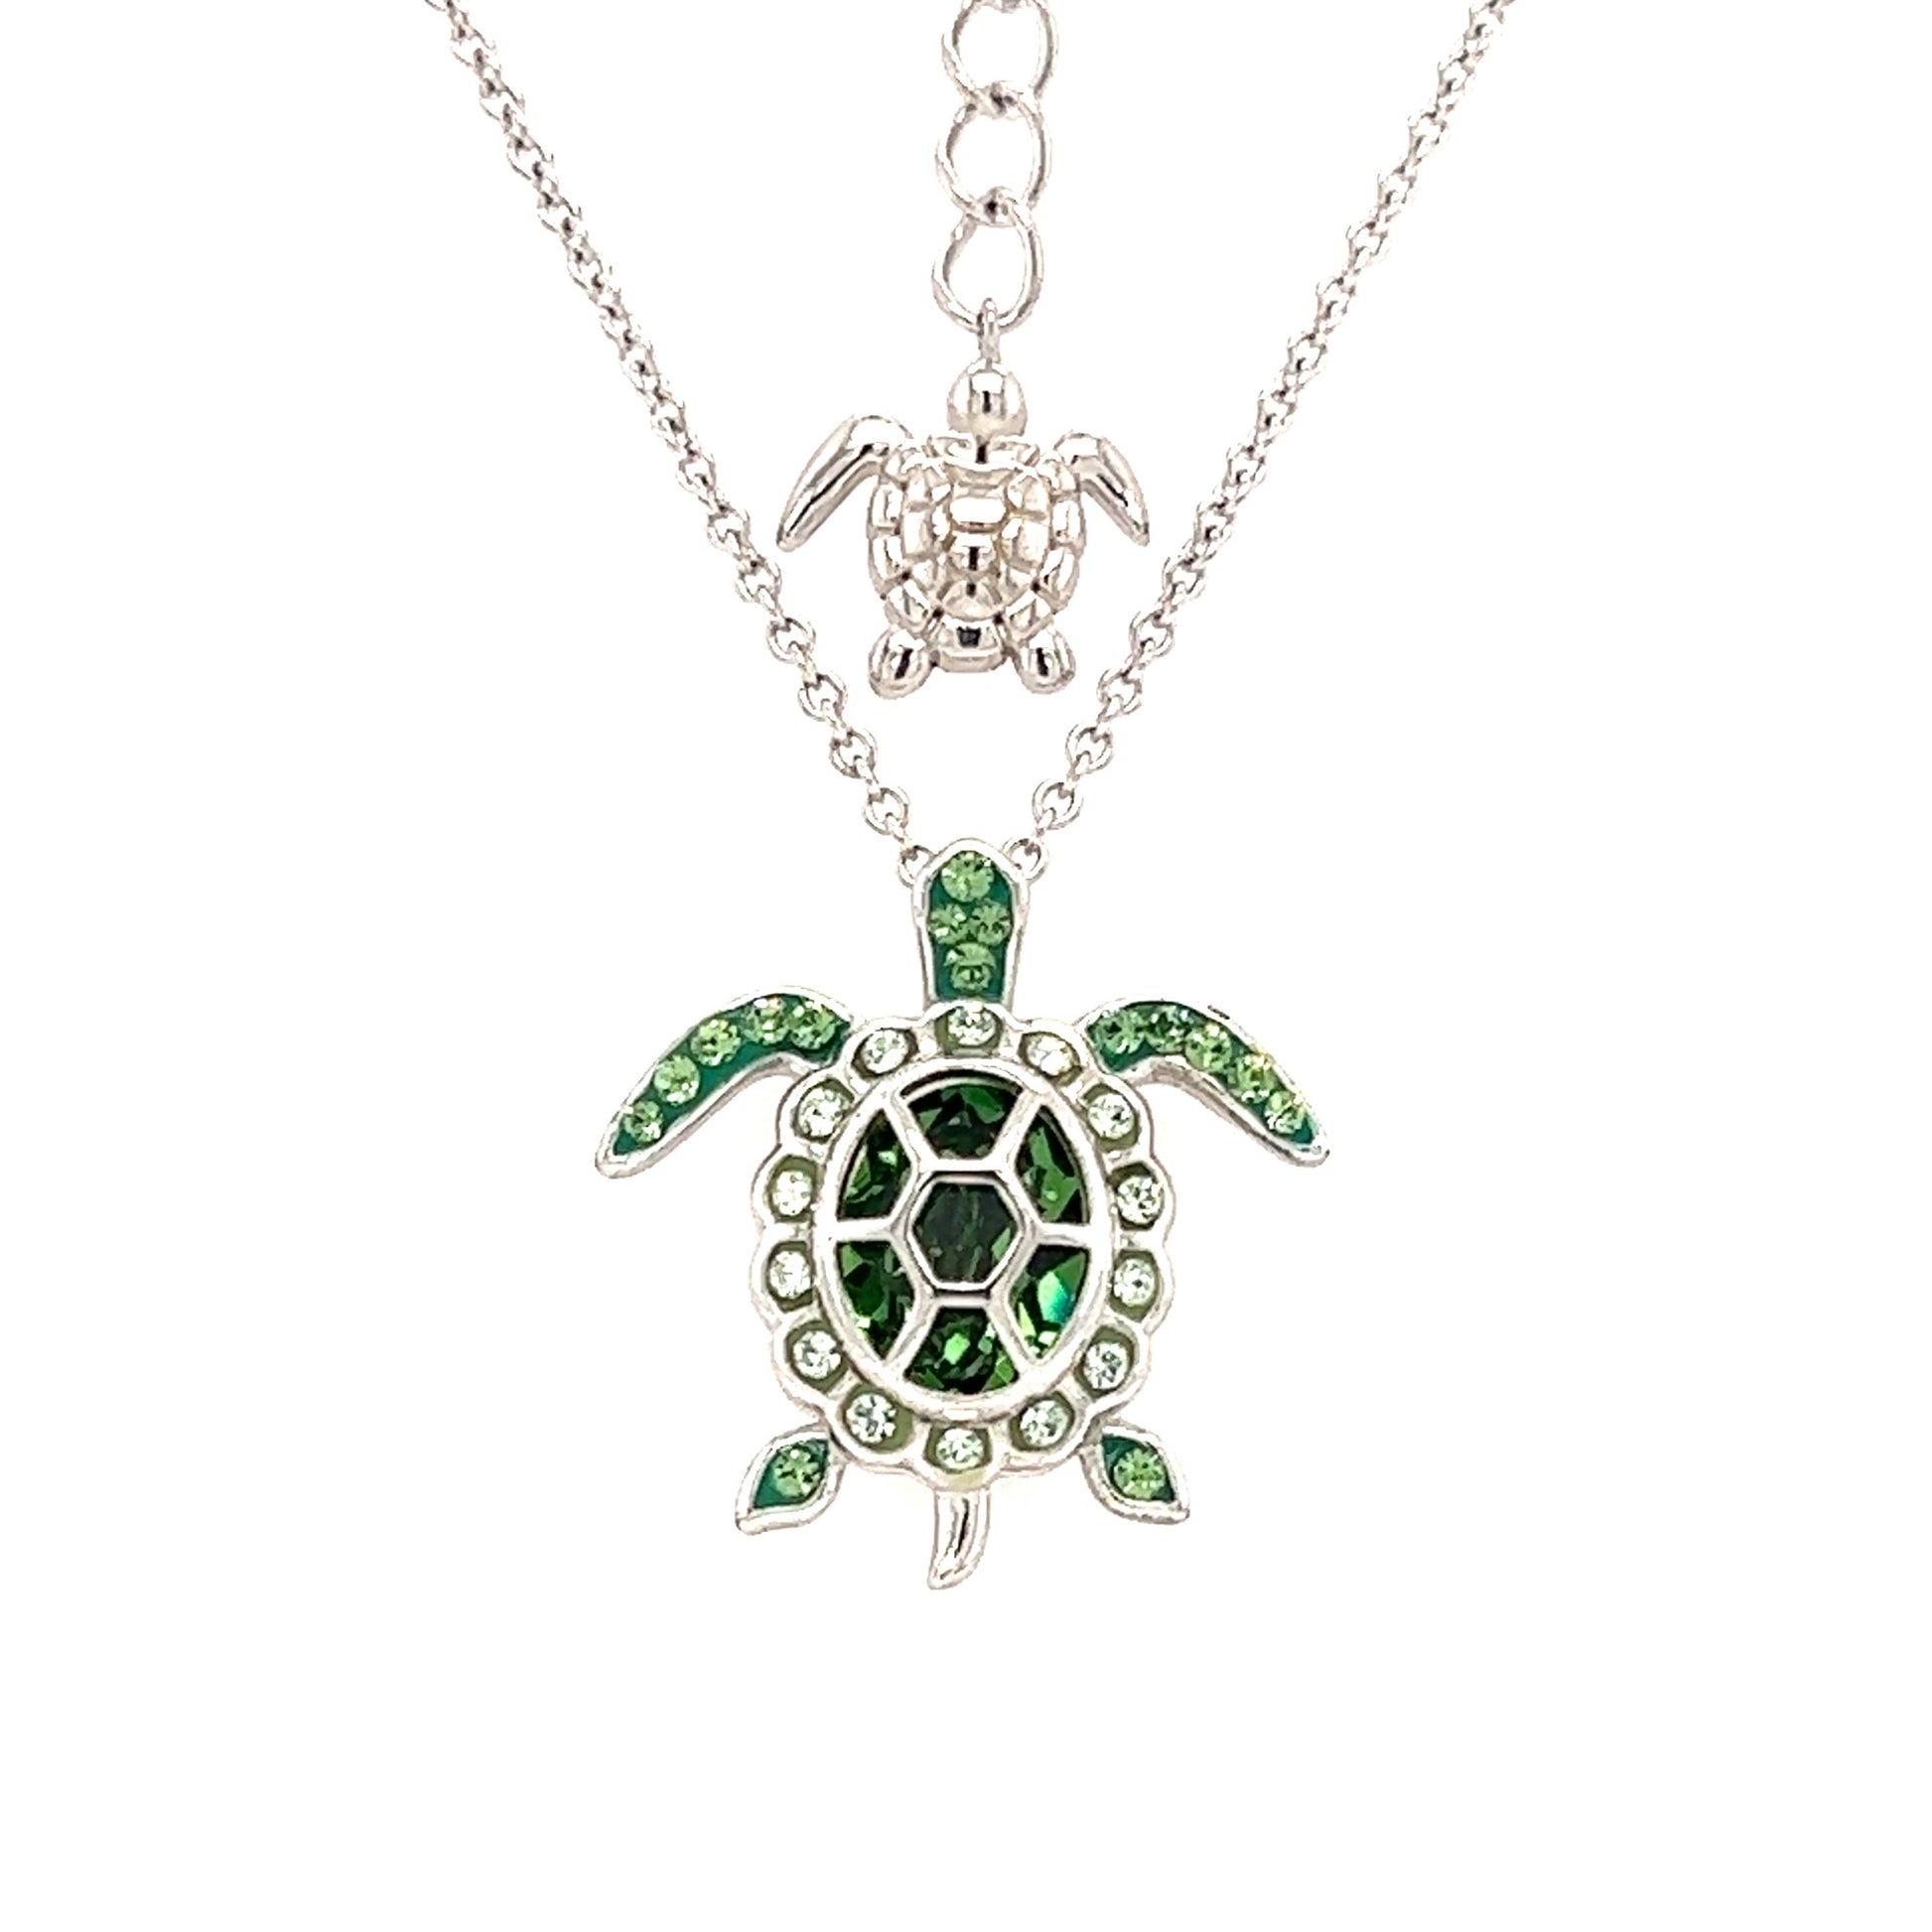 Sea Turtle Necklace with Light Green Crystals in Sterling Silver. Pendant and End Front View